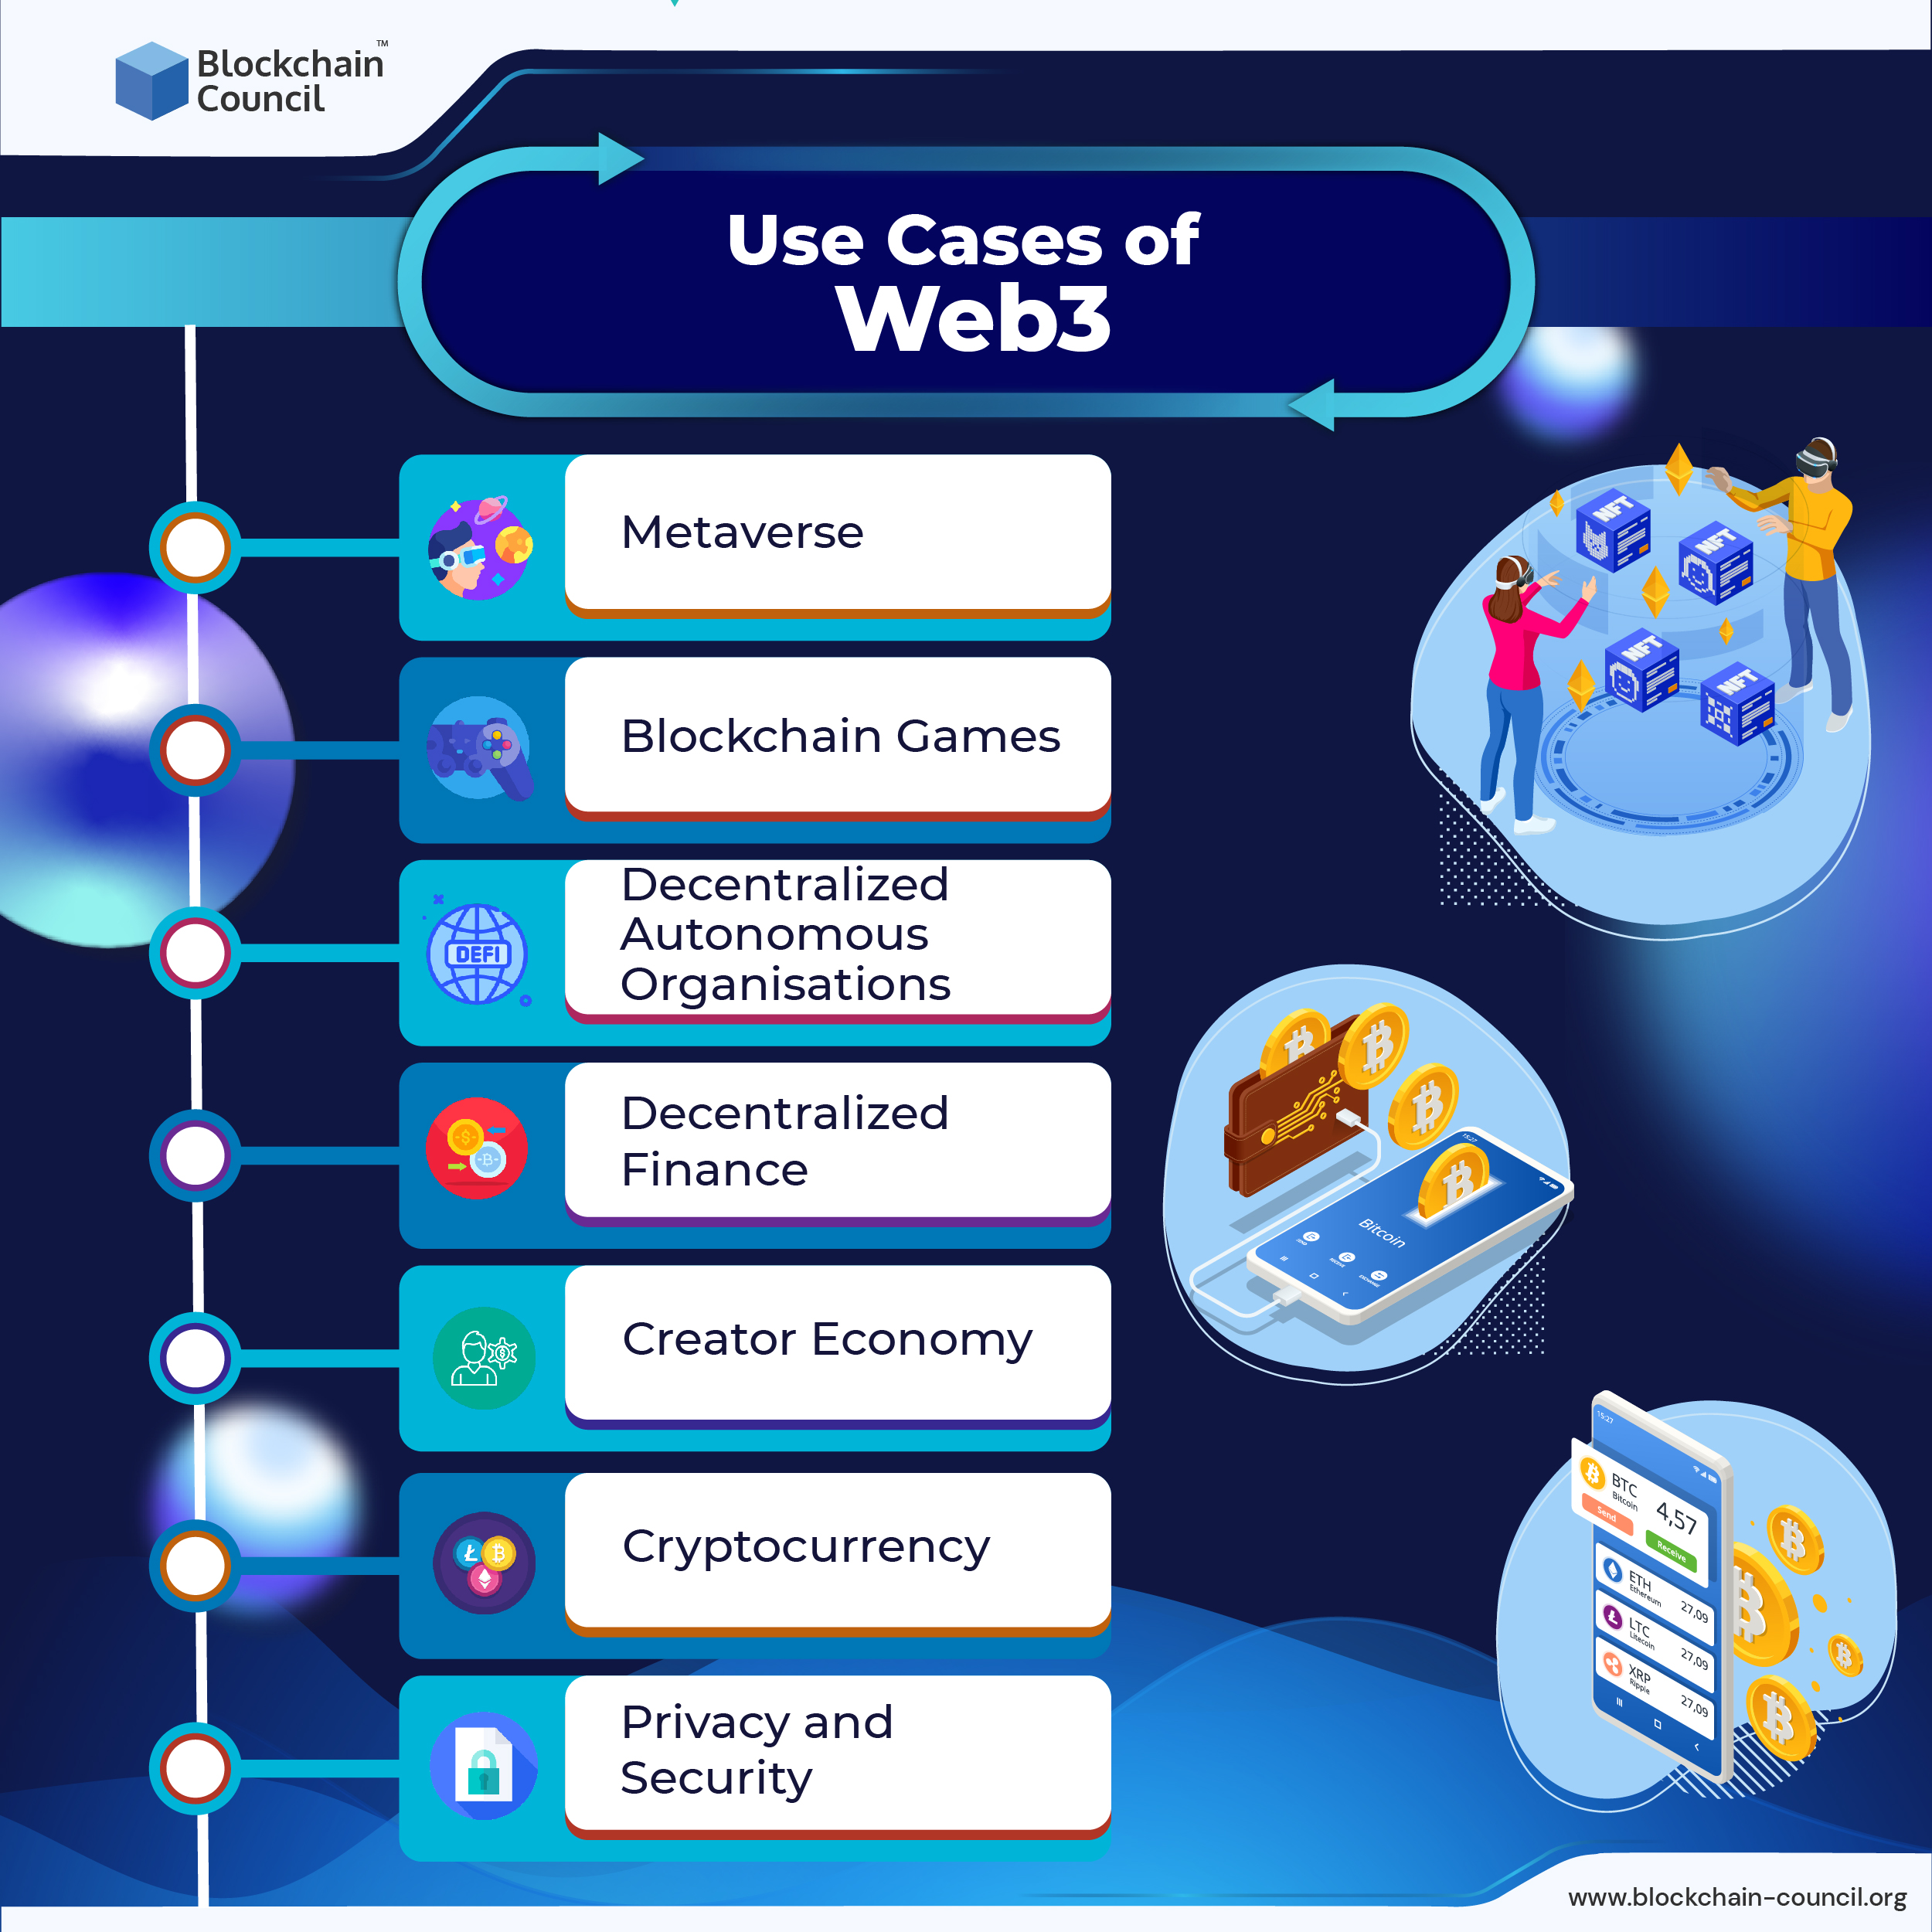 Use Cases of Web3